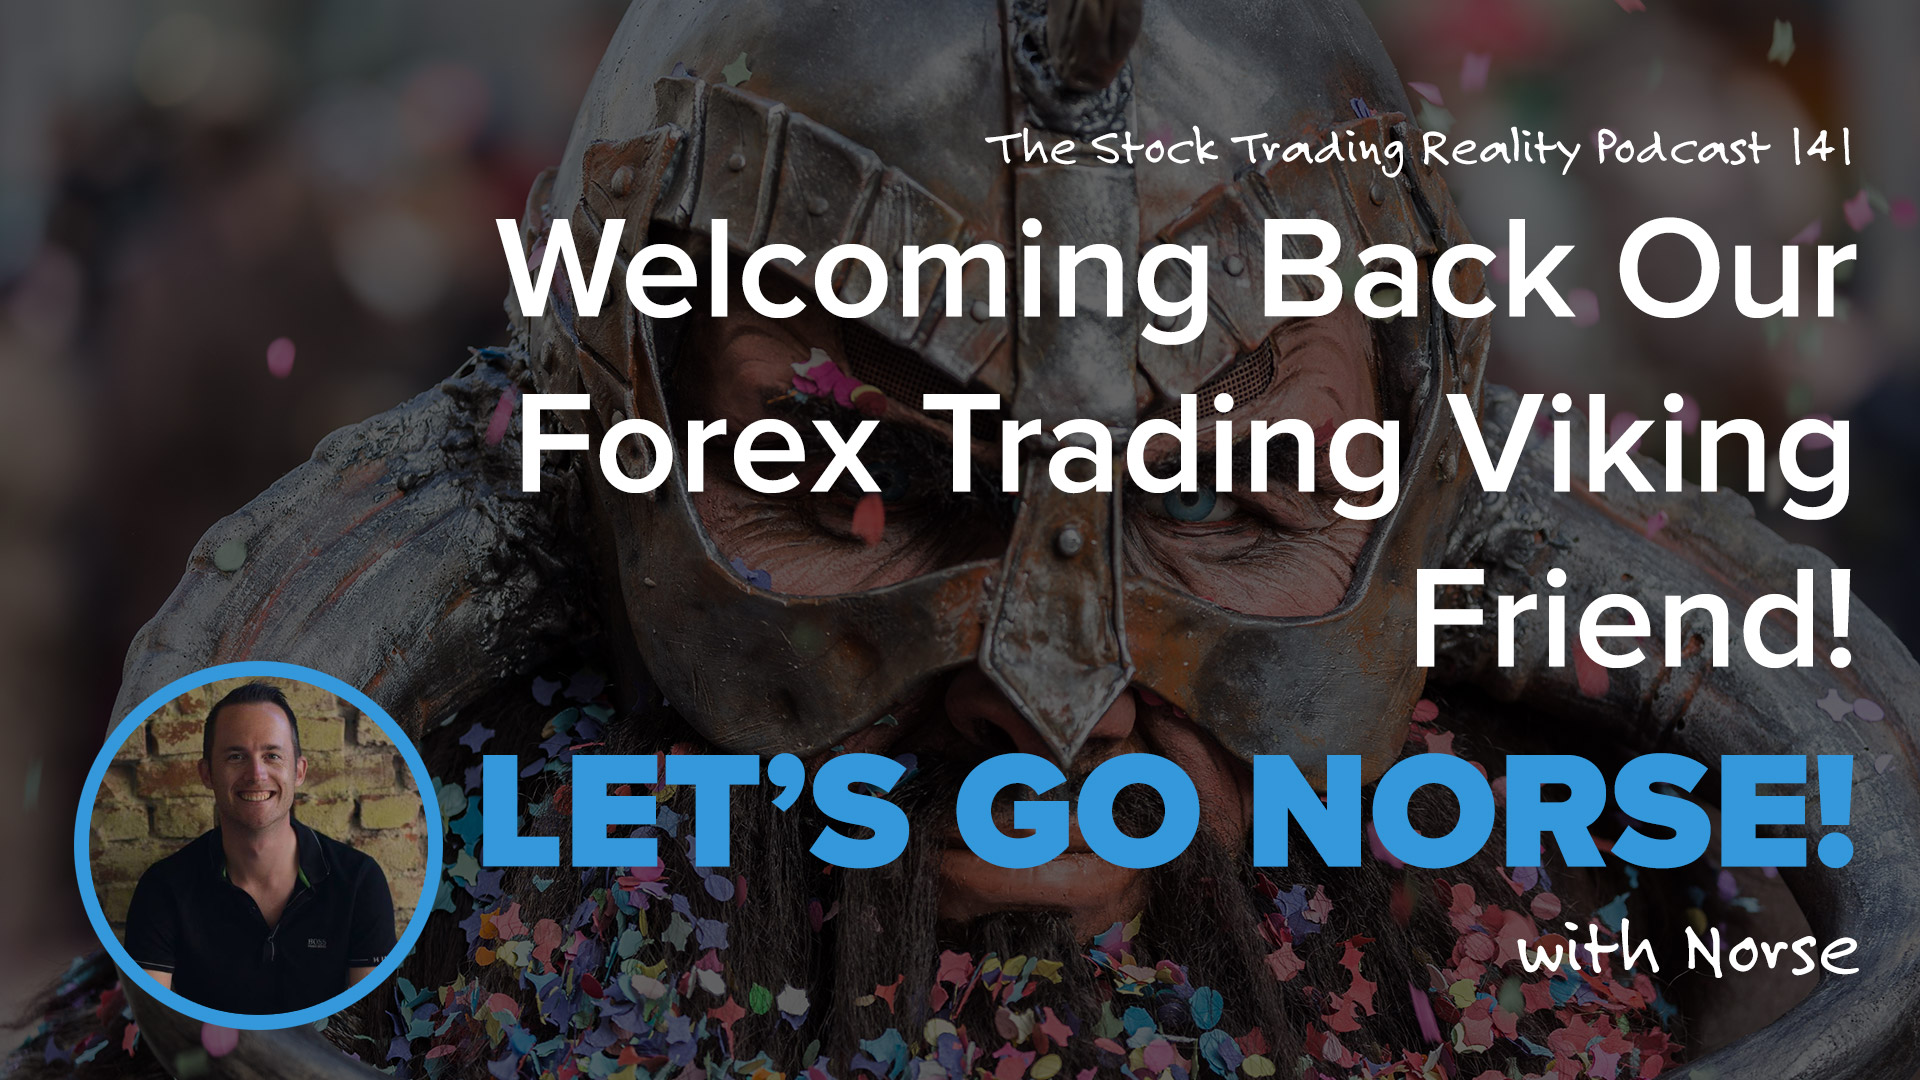 STR 141: Welcoming Back Our Forex Trading Viking Friend! Let's Go Norse!